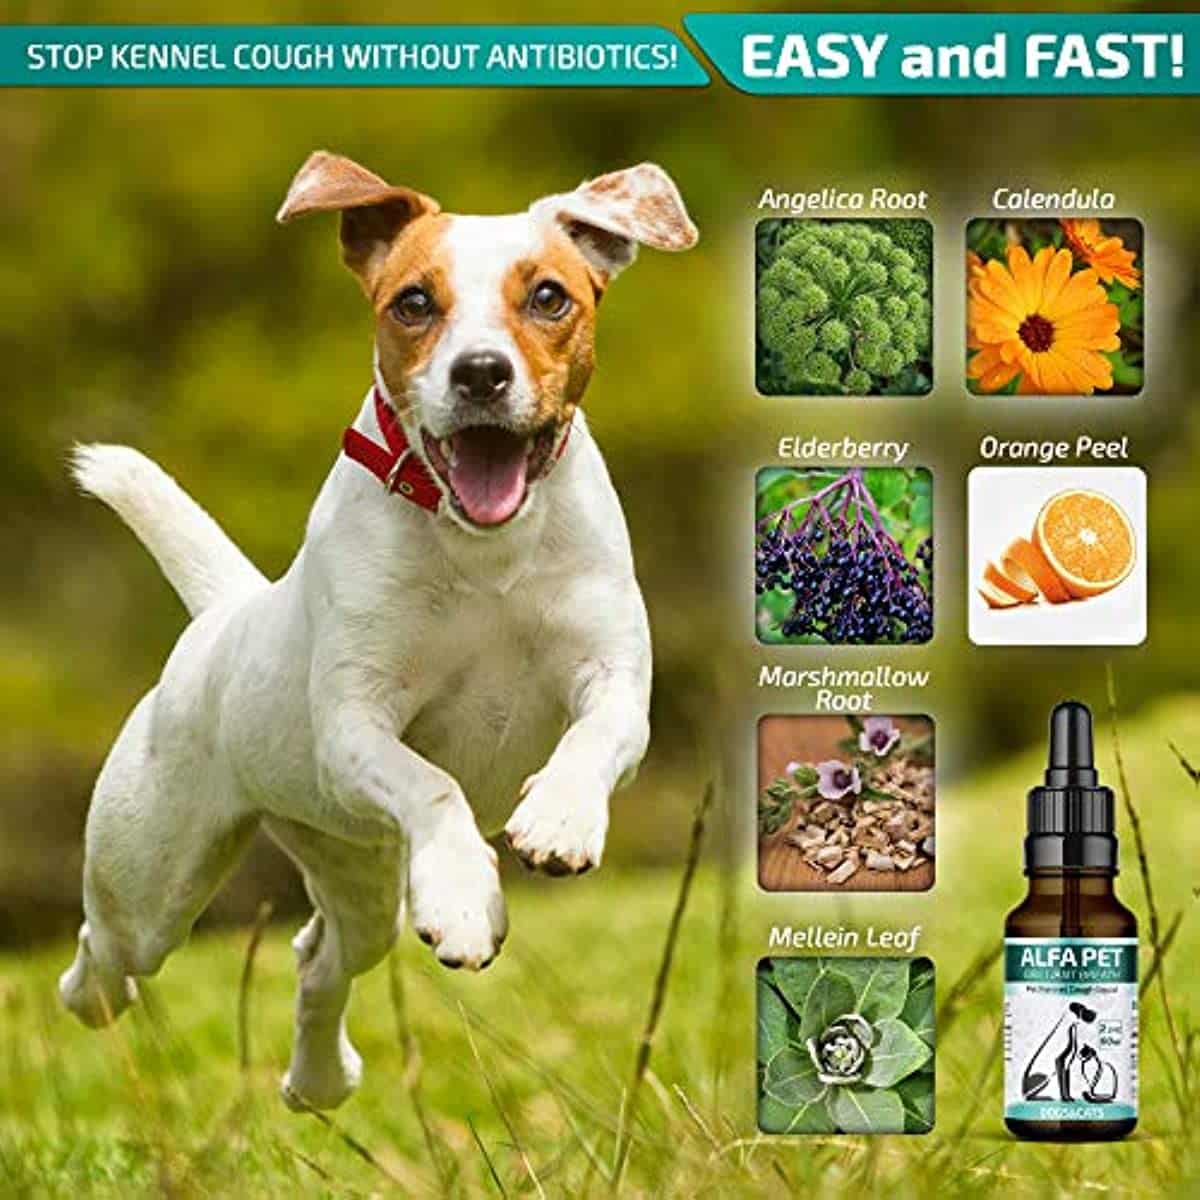 Alfa Pet Kennel Cough Medicine For Dogs Organic Dog Colds &  Allergies ...